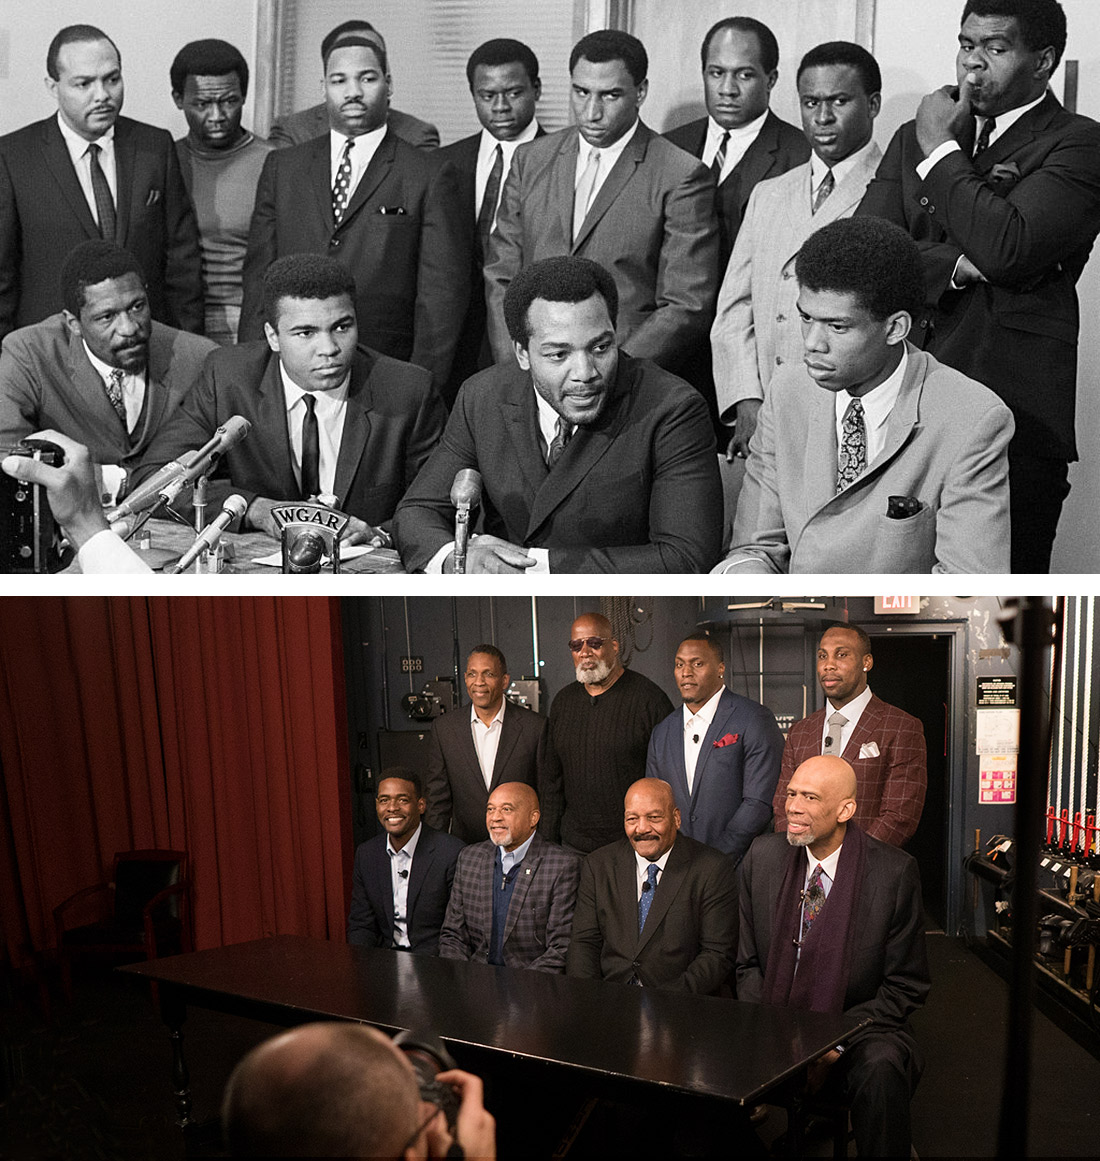 A meeting of top African-American athletes in 1967.